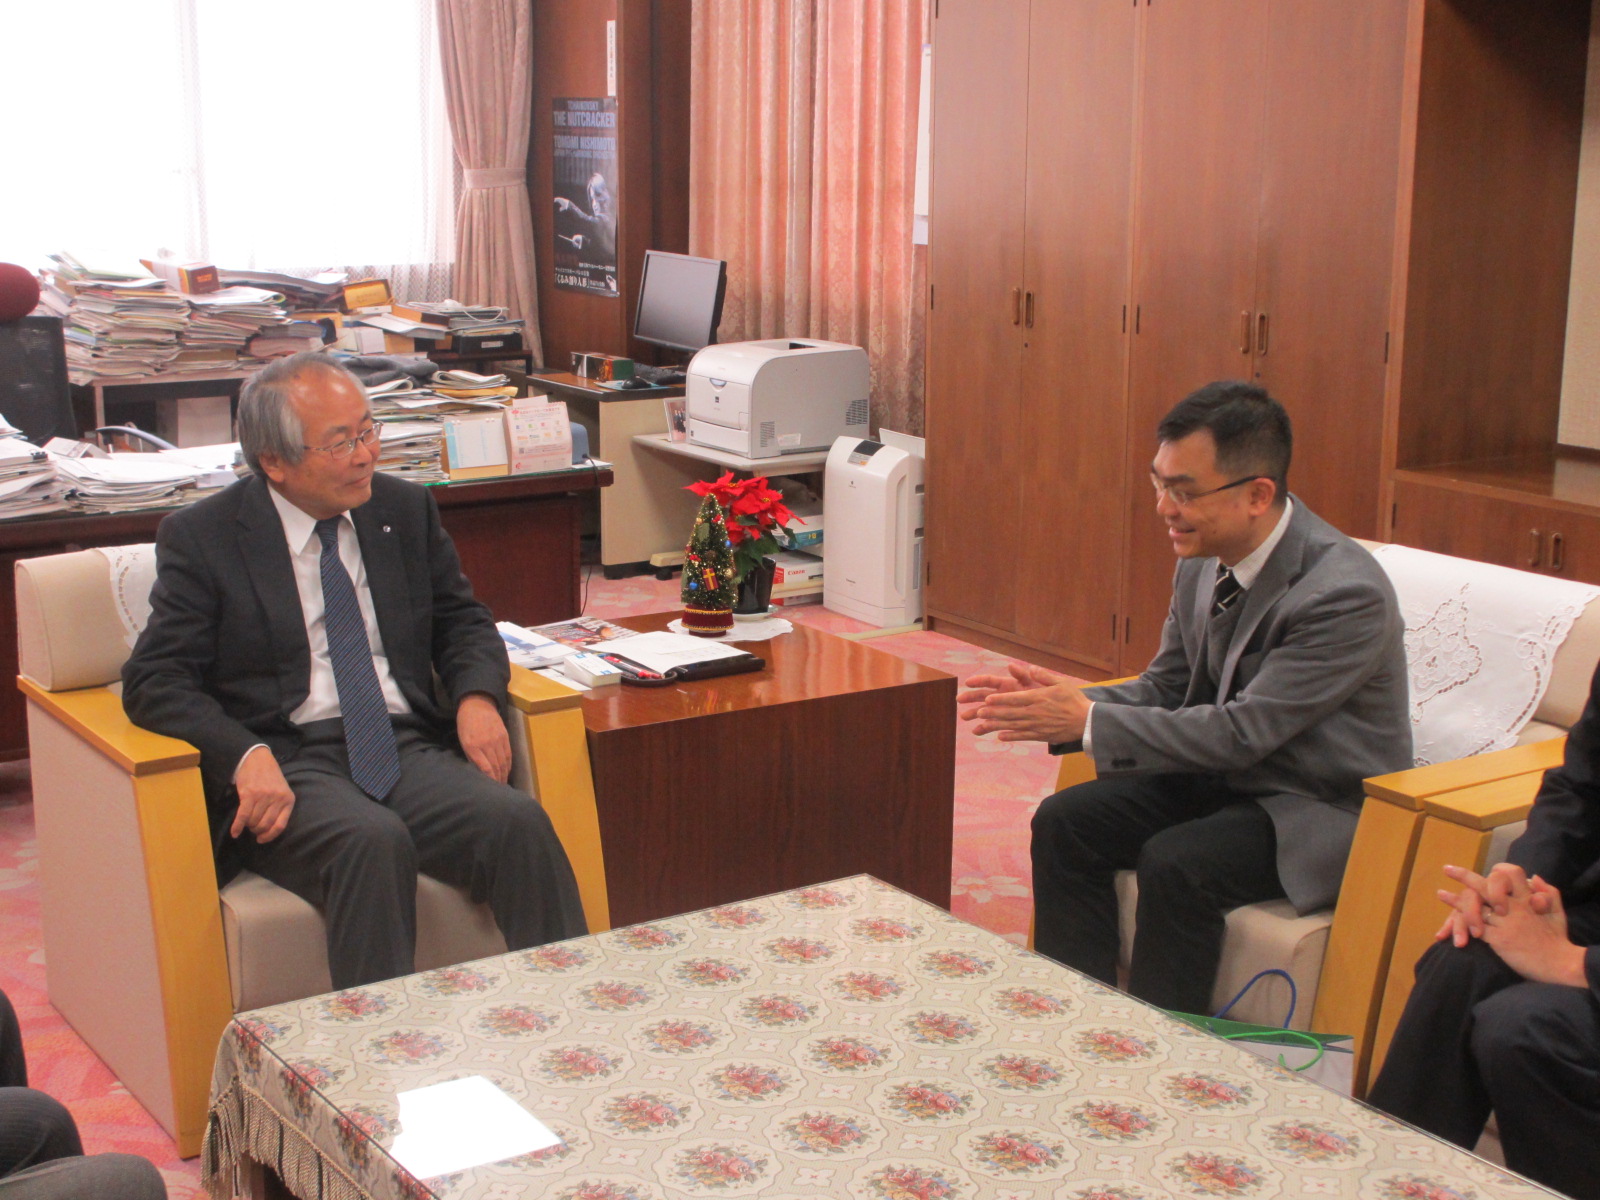 President Inoue and Prof. Huang had a meeting